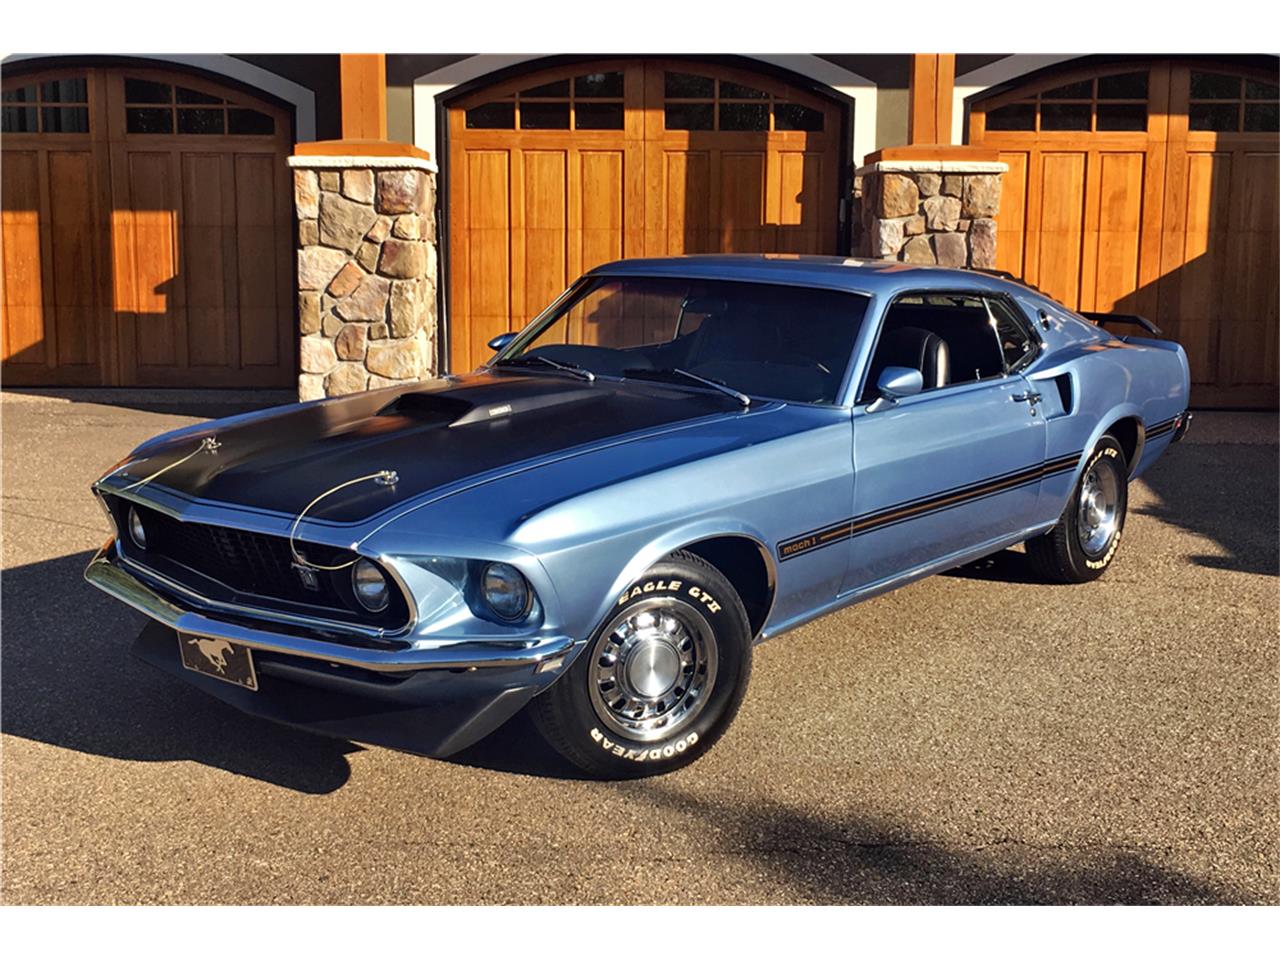 1969 Ford Mustang Mach 1 for Sale | ClassicCars.com | CC-1137483